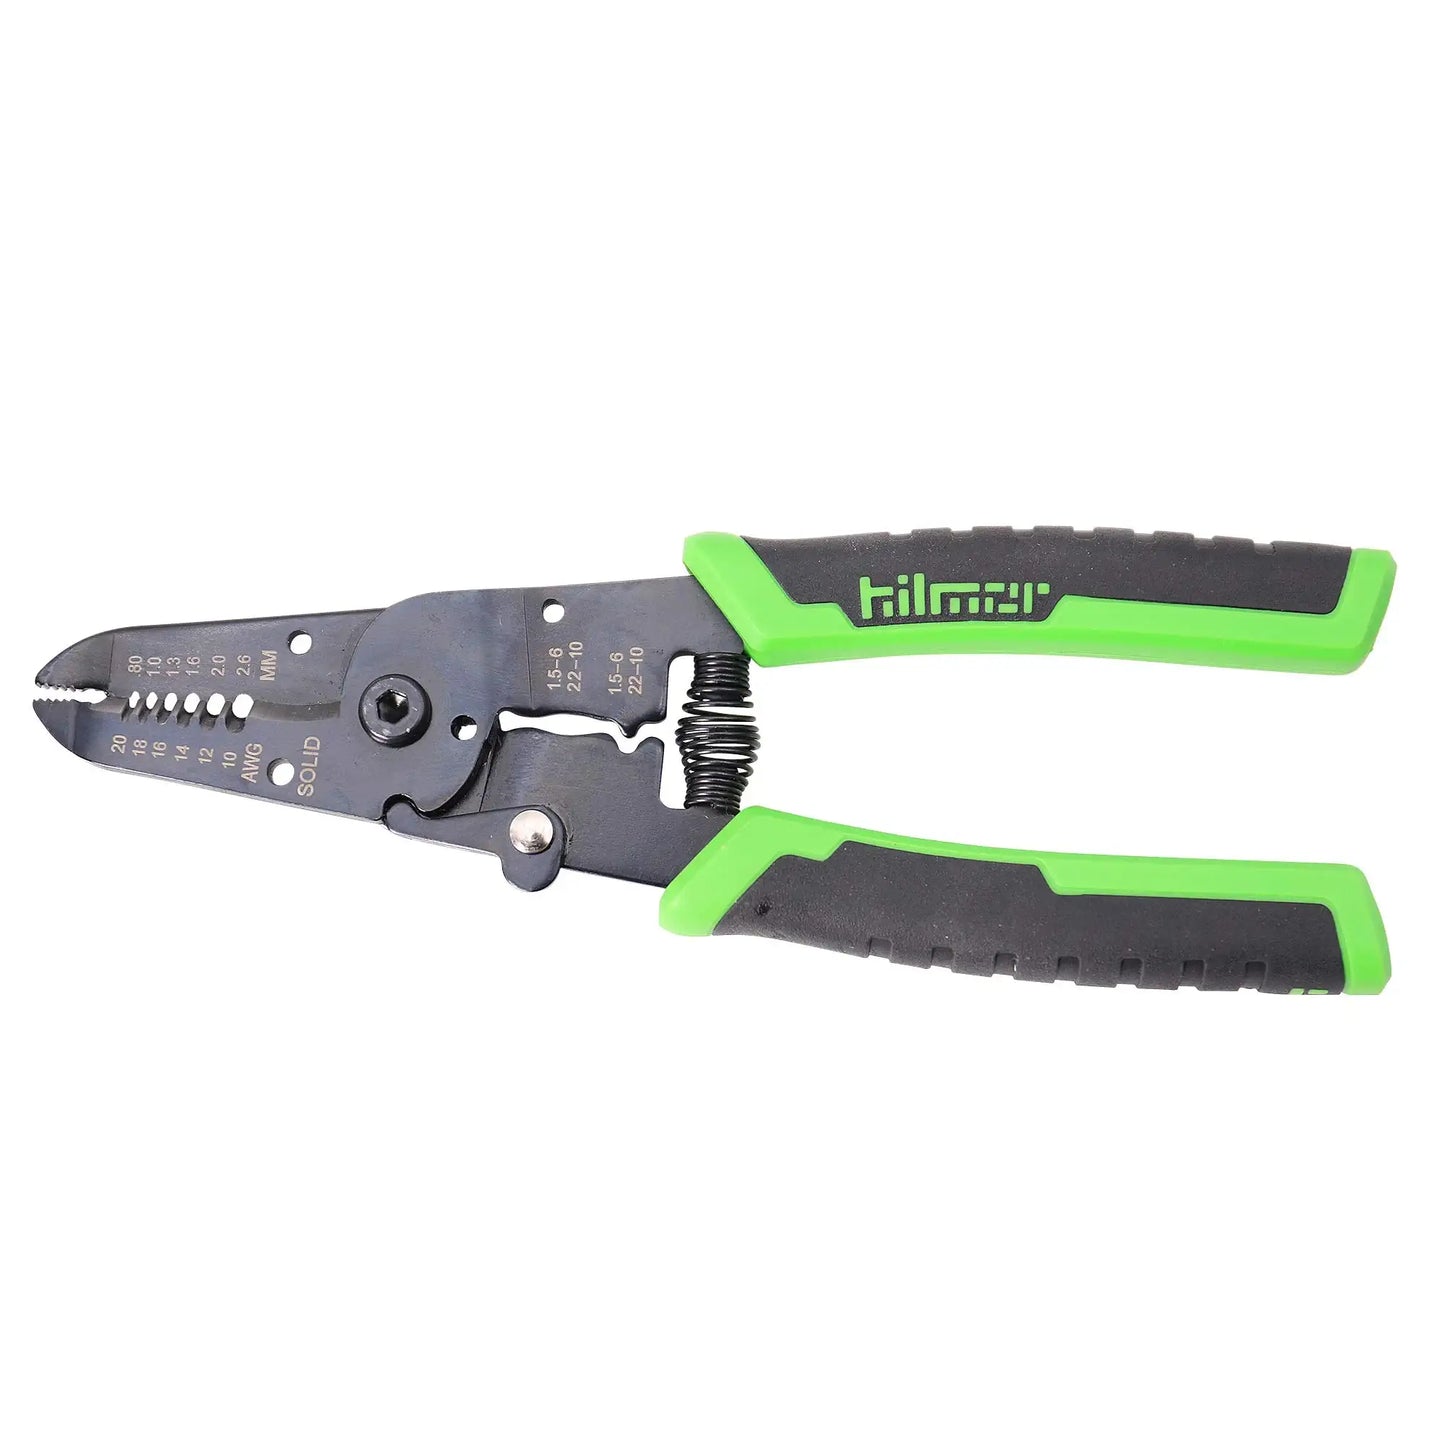 Hilmor 7 Wire Stripper with Rubber Handle Grip, Black & Green, WS7 1885426